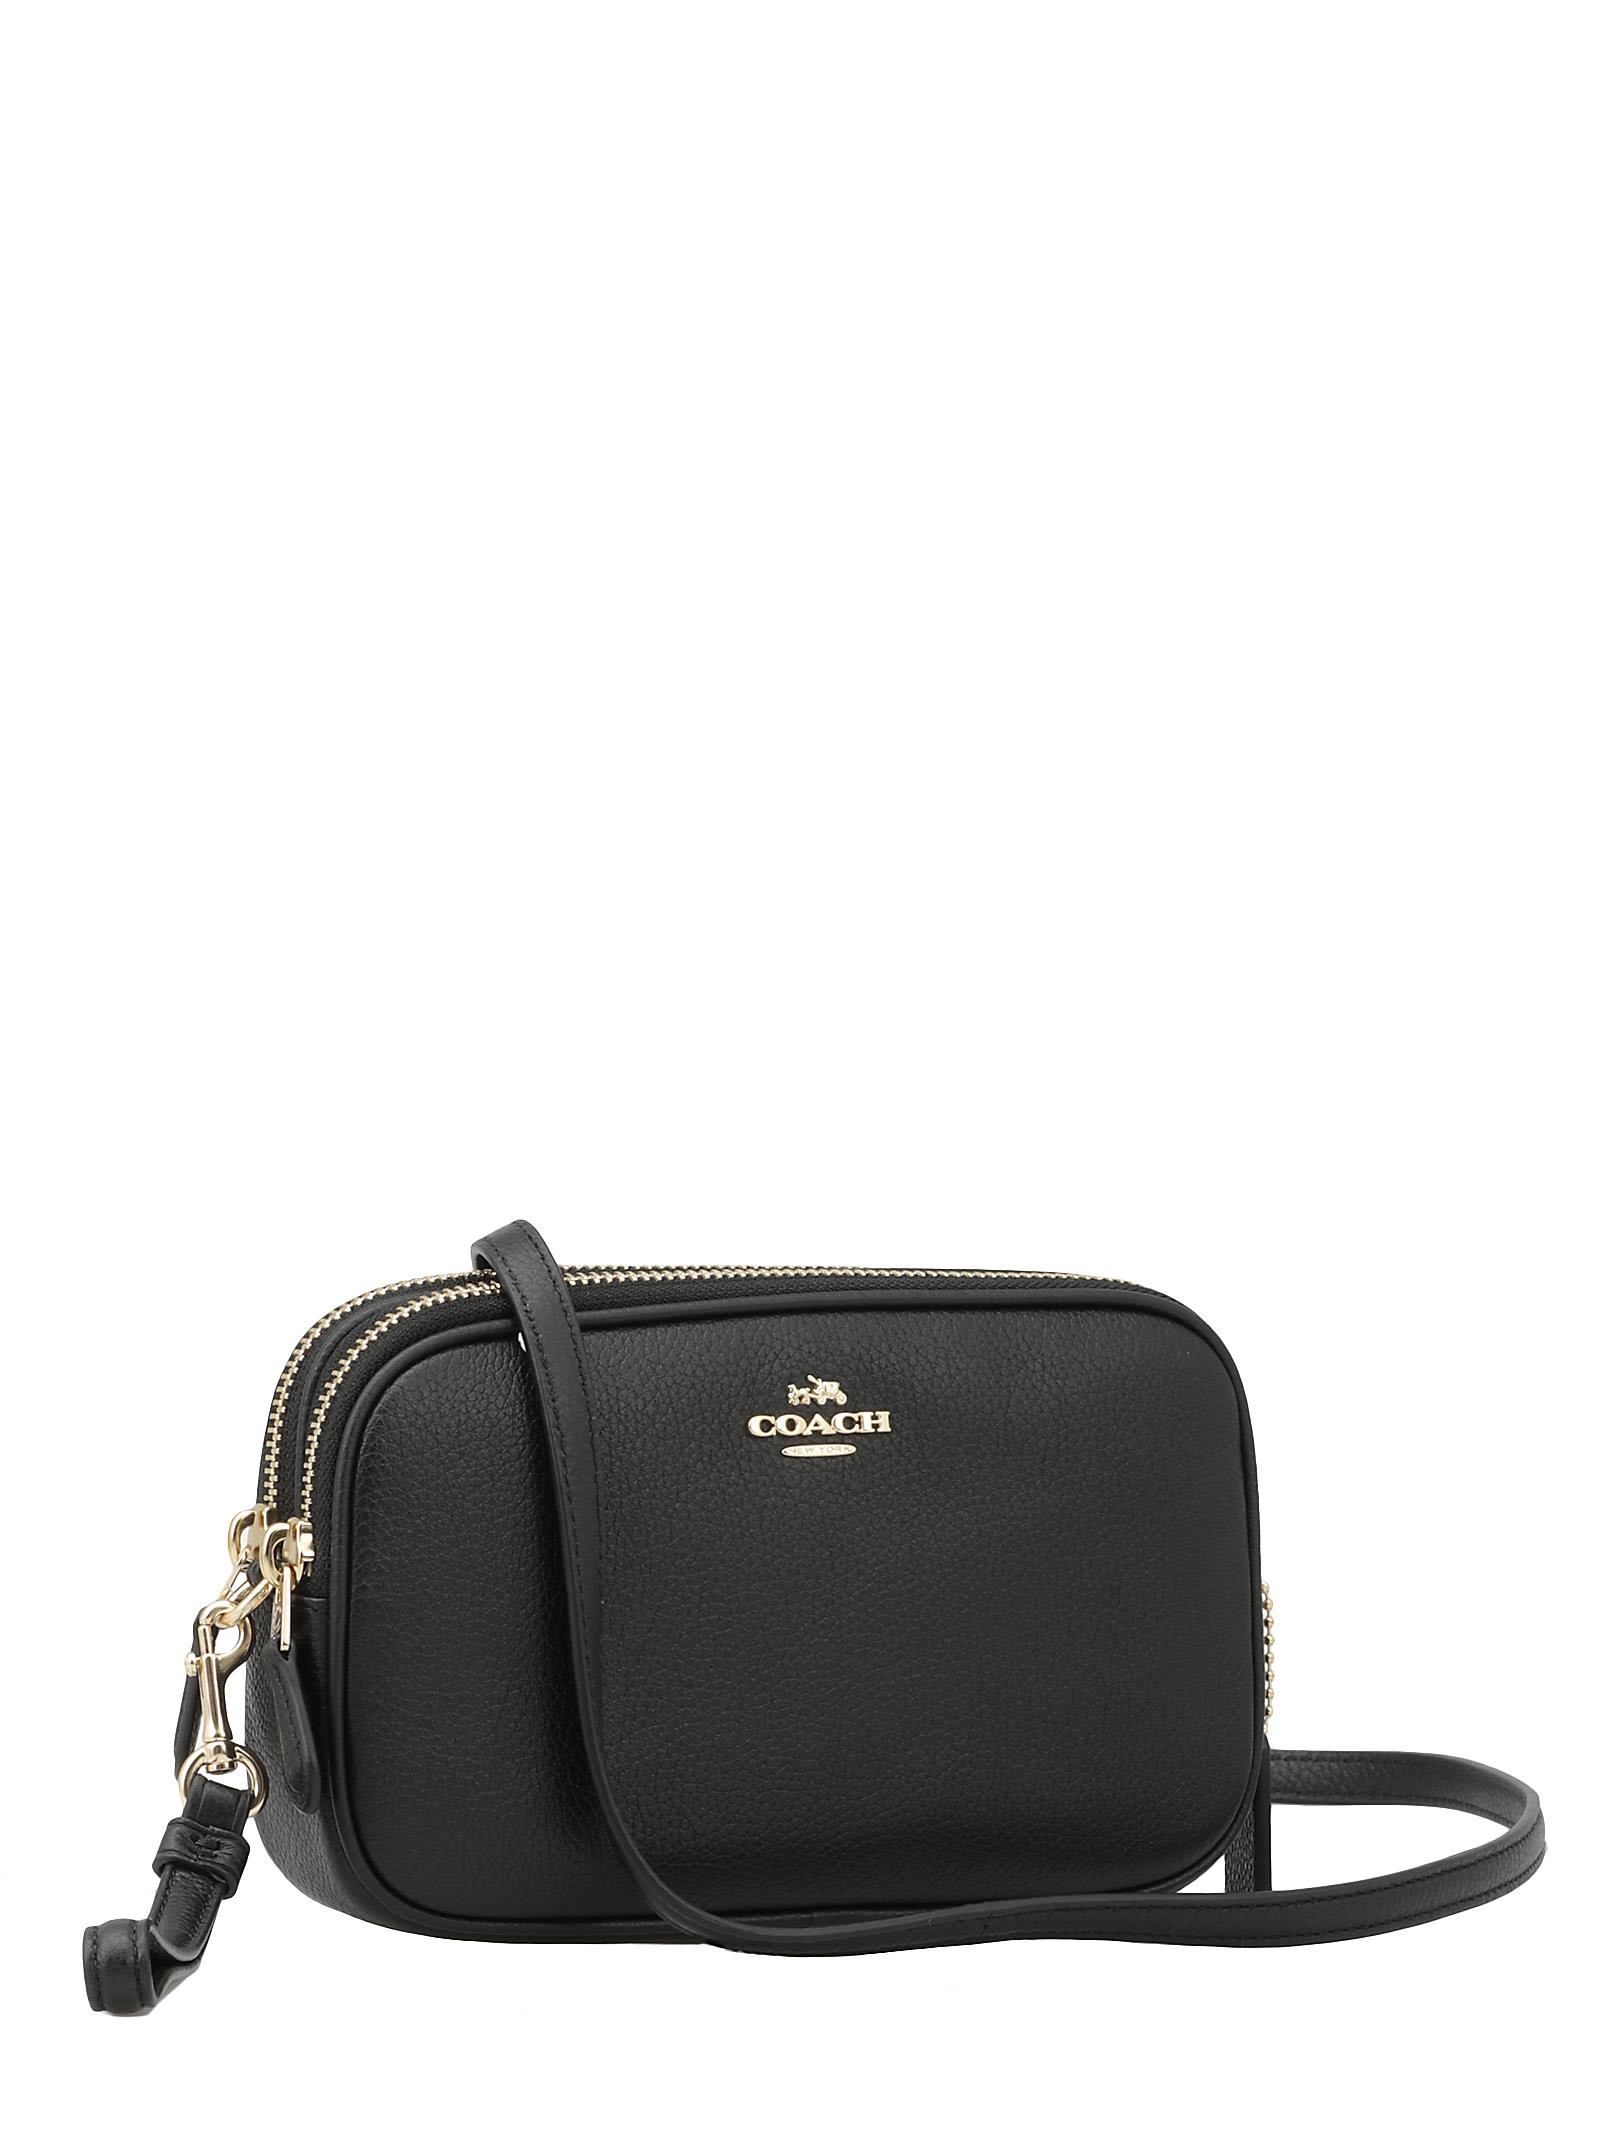 Awesome! Best price in the market for Coach Crossbody Clutch